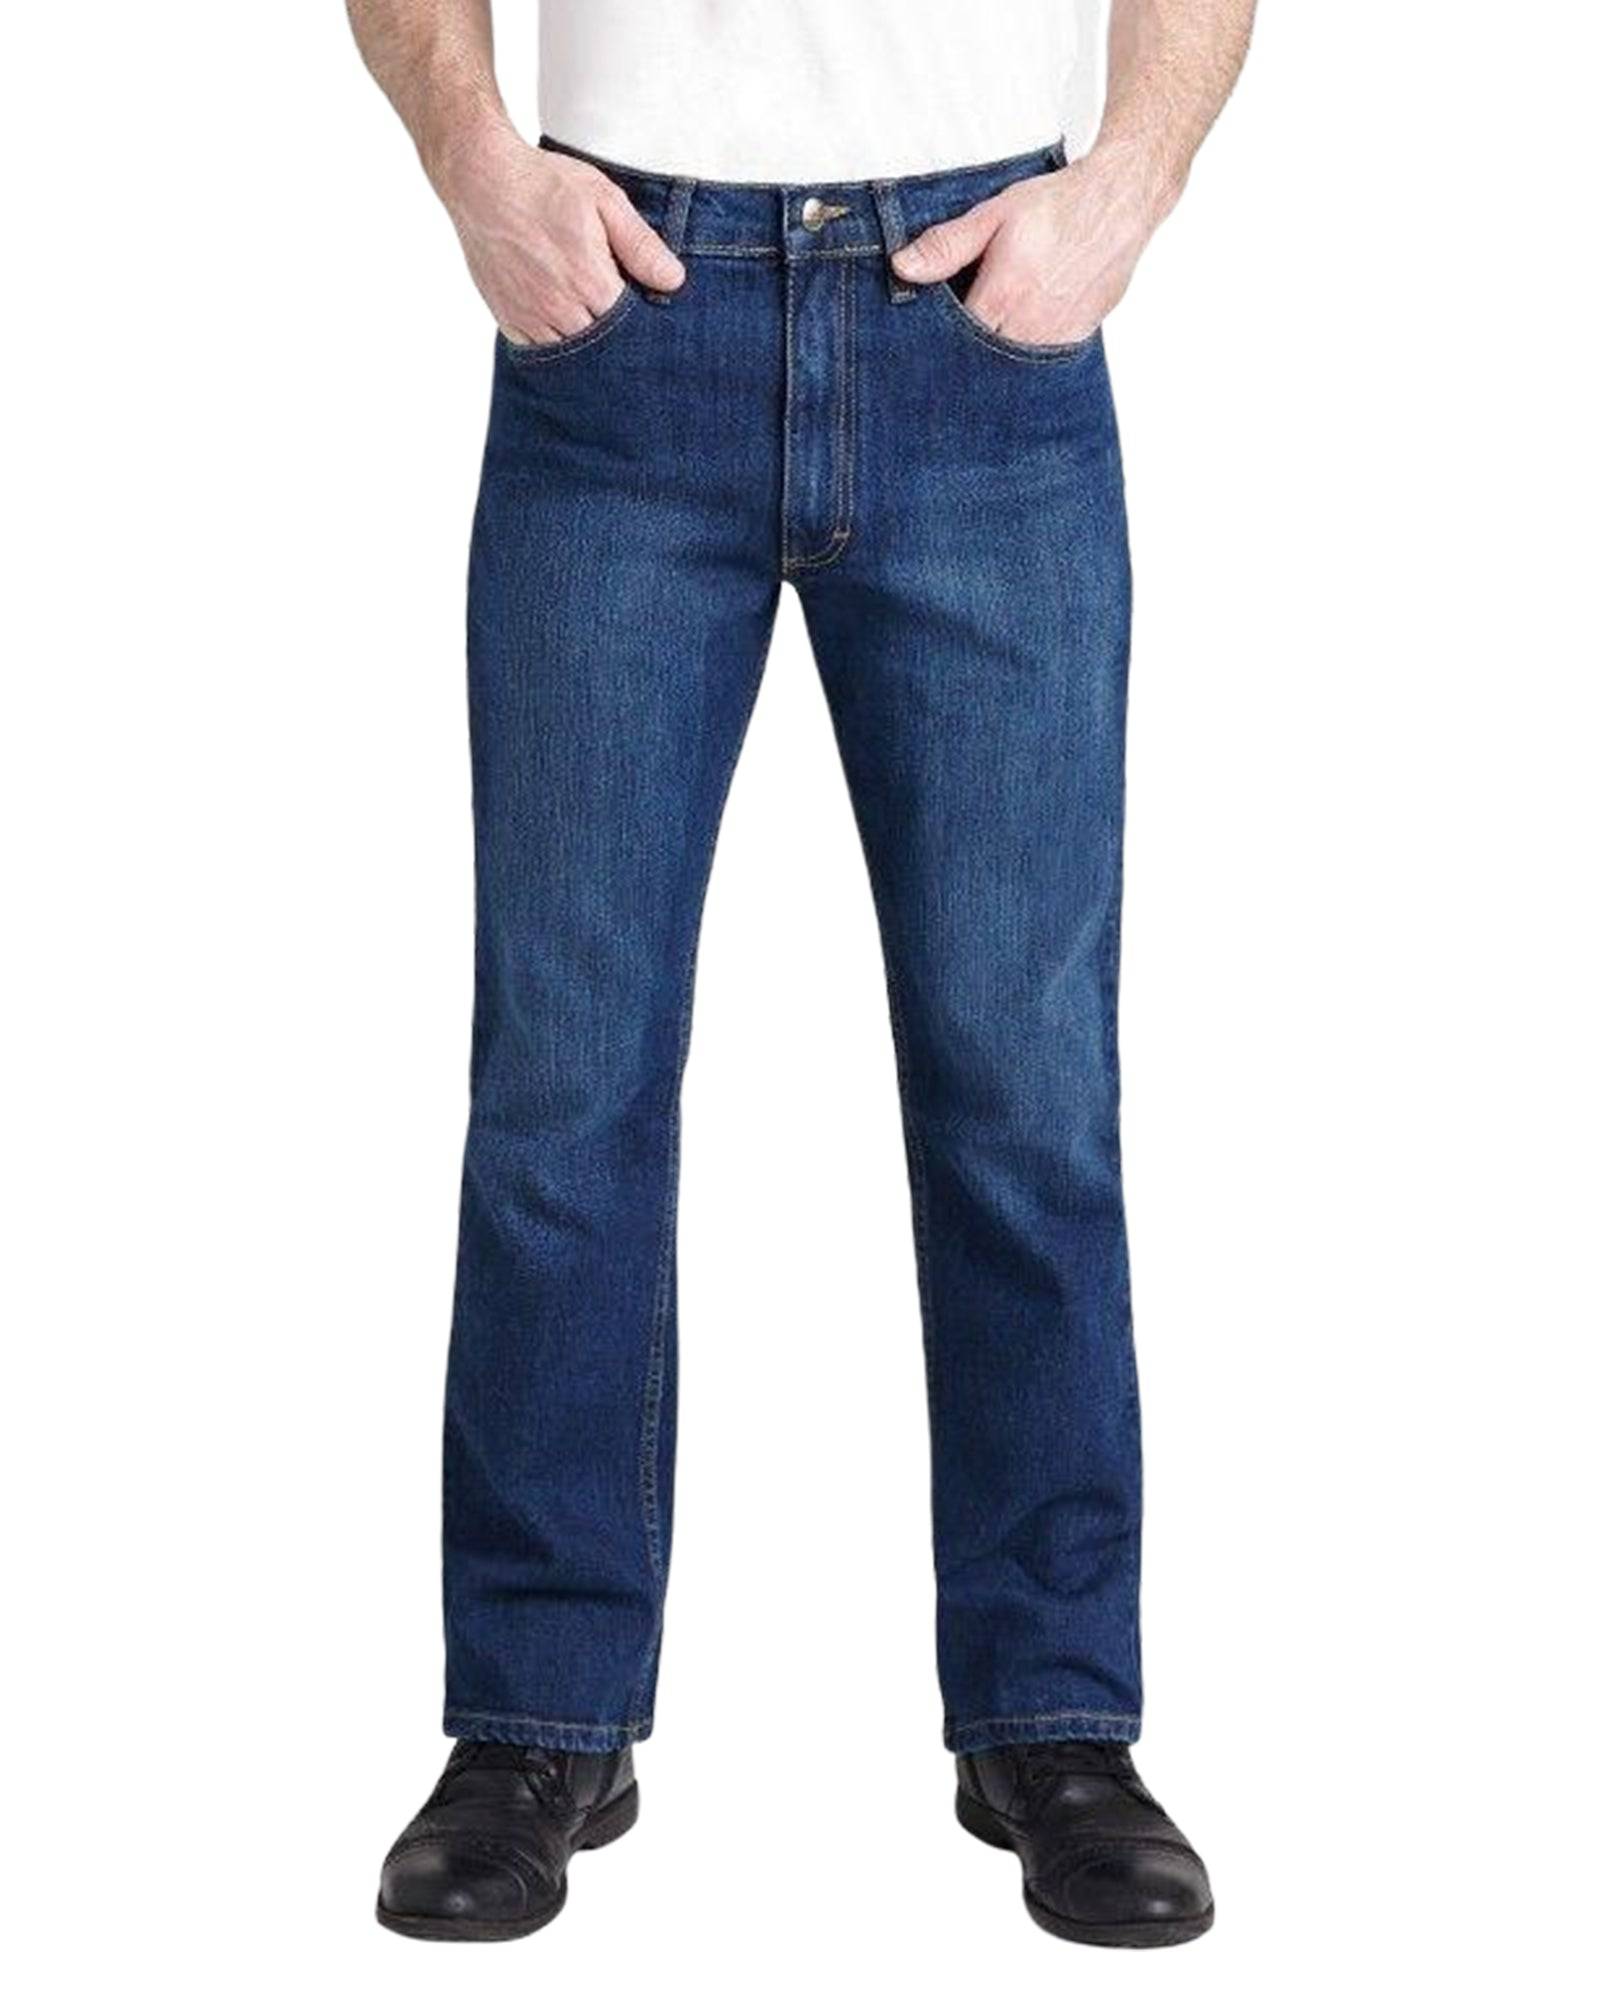 Grand River Ring Spun Stretch Jeans Classic Fit - Rainwater's Men's Clothing and Tuxedo Rental